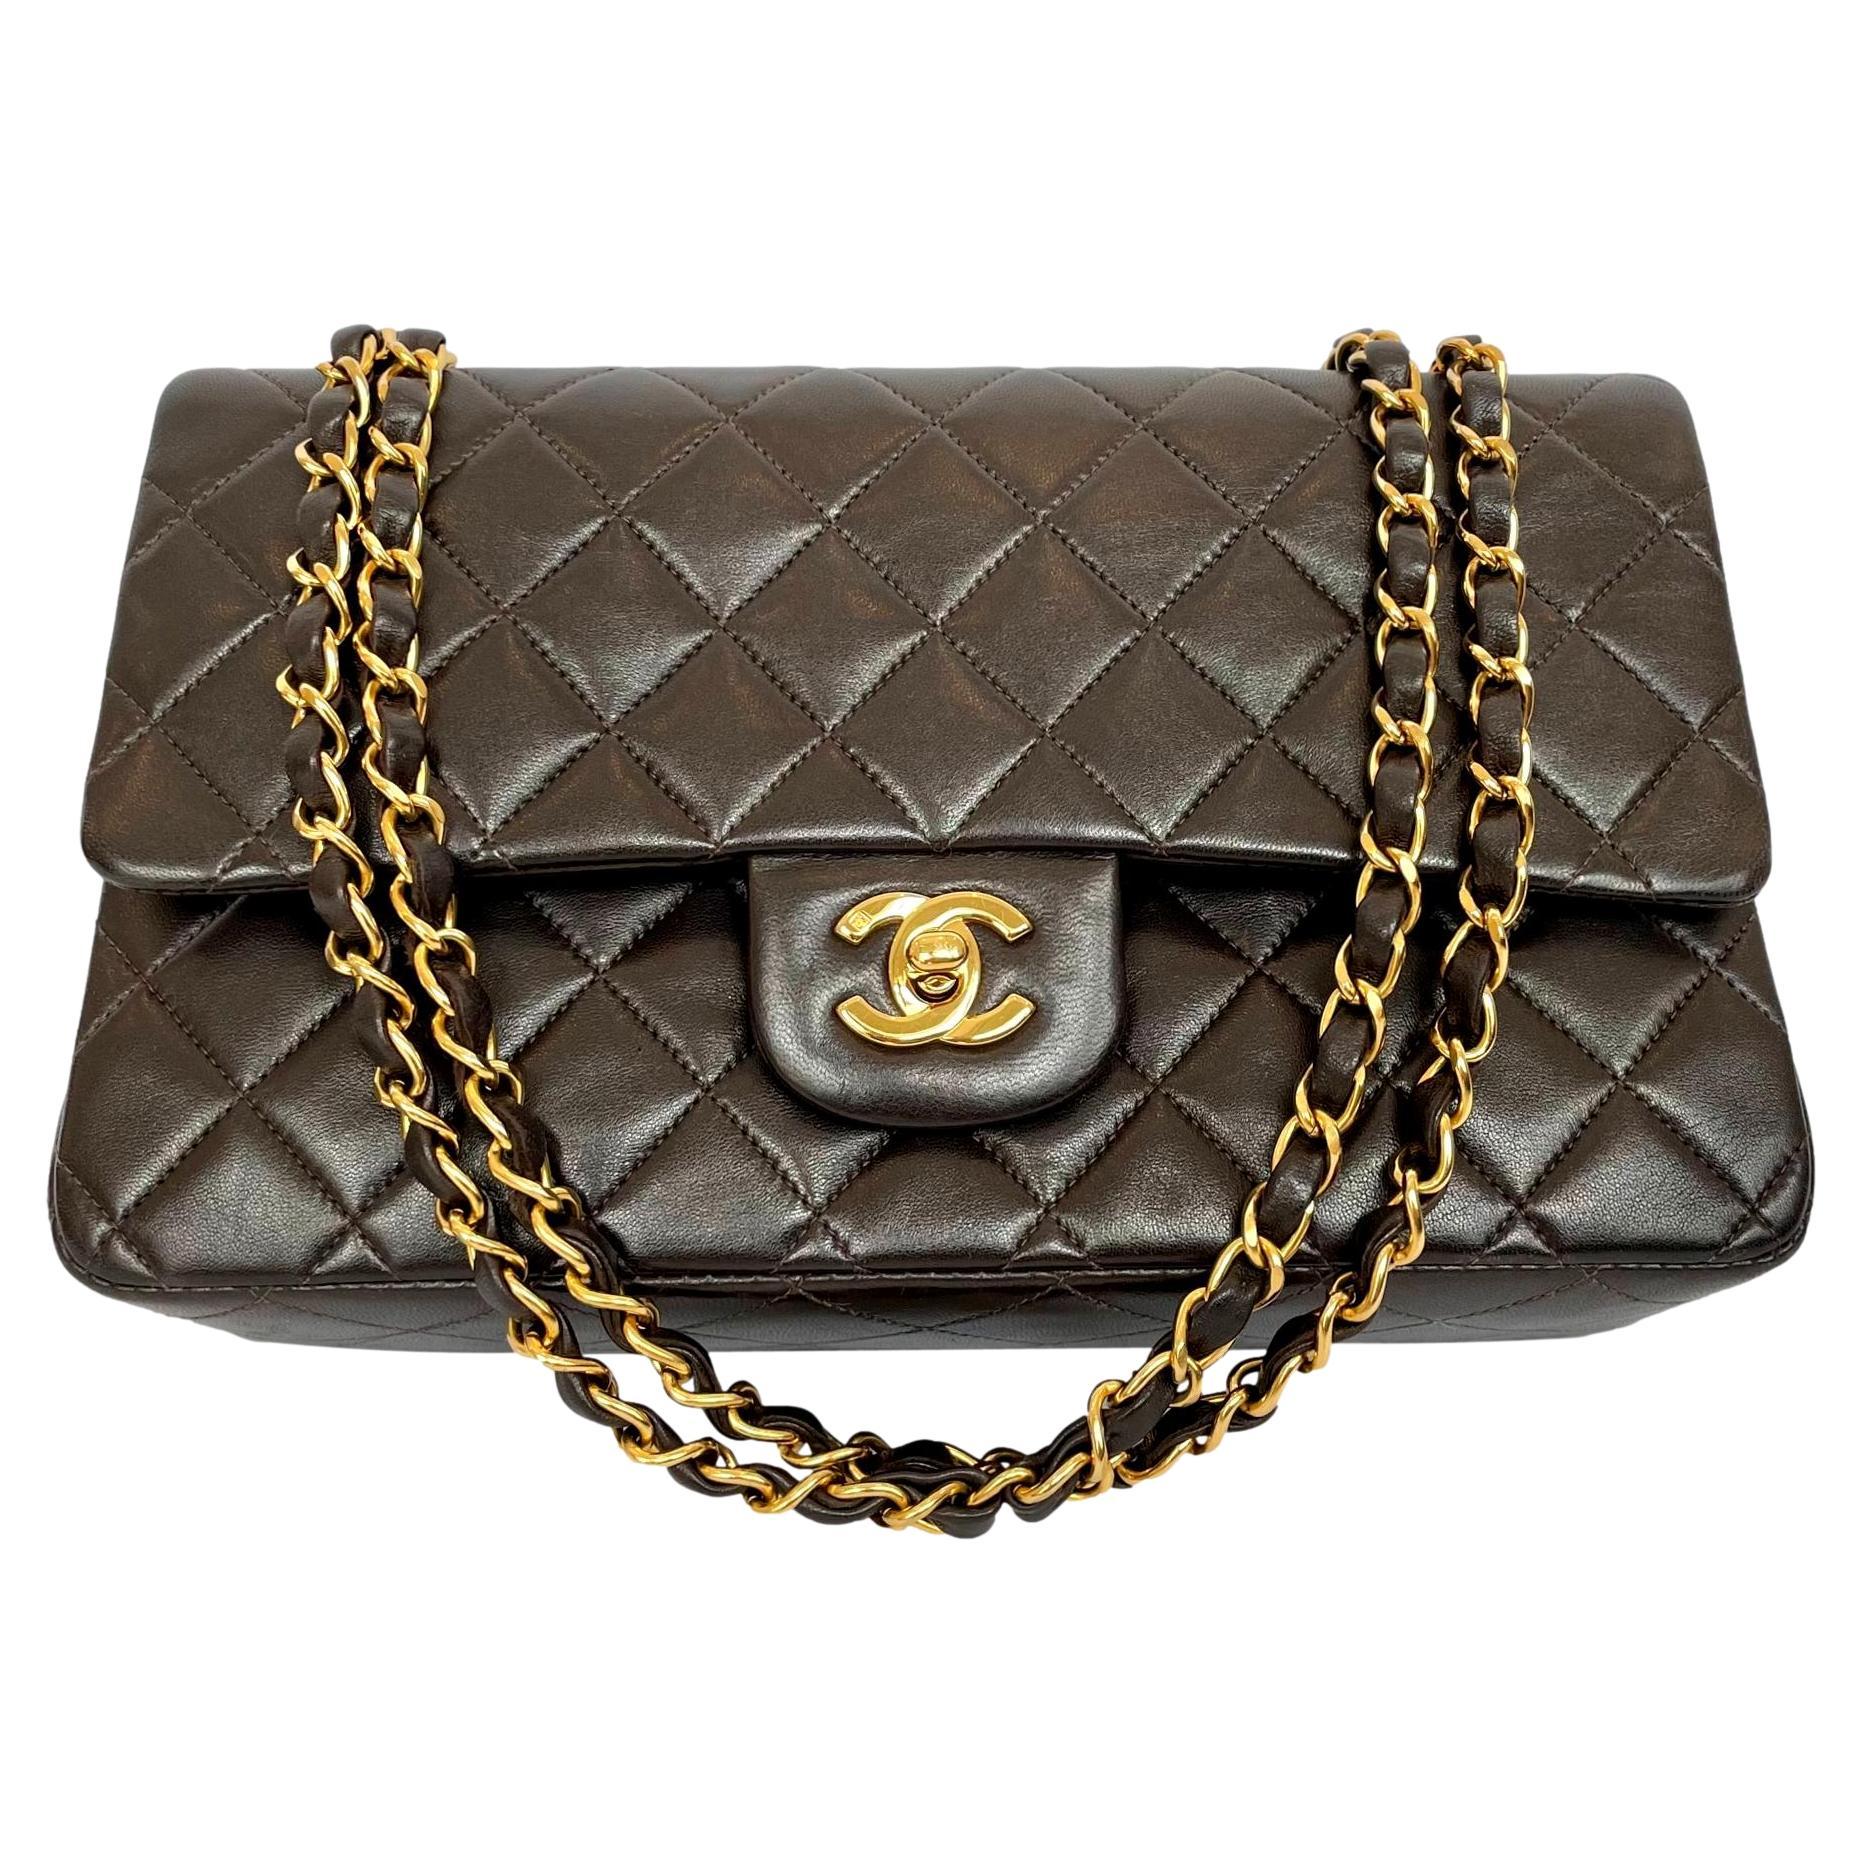 Chanel Brown Lambskin Medium Classic Double Flap Bag - 2 For Sale